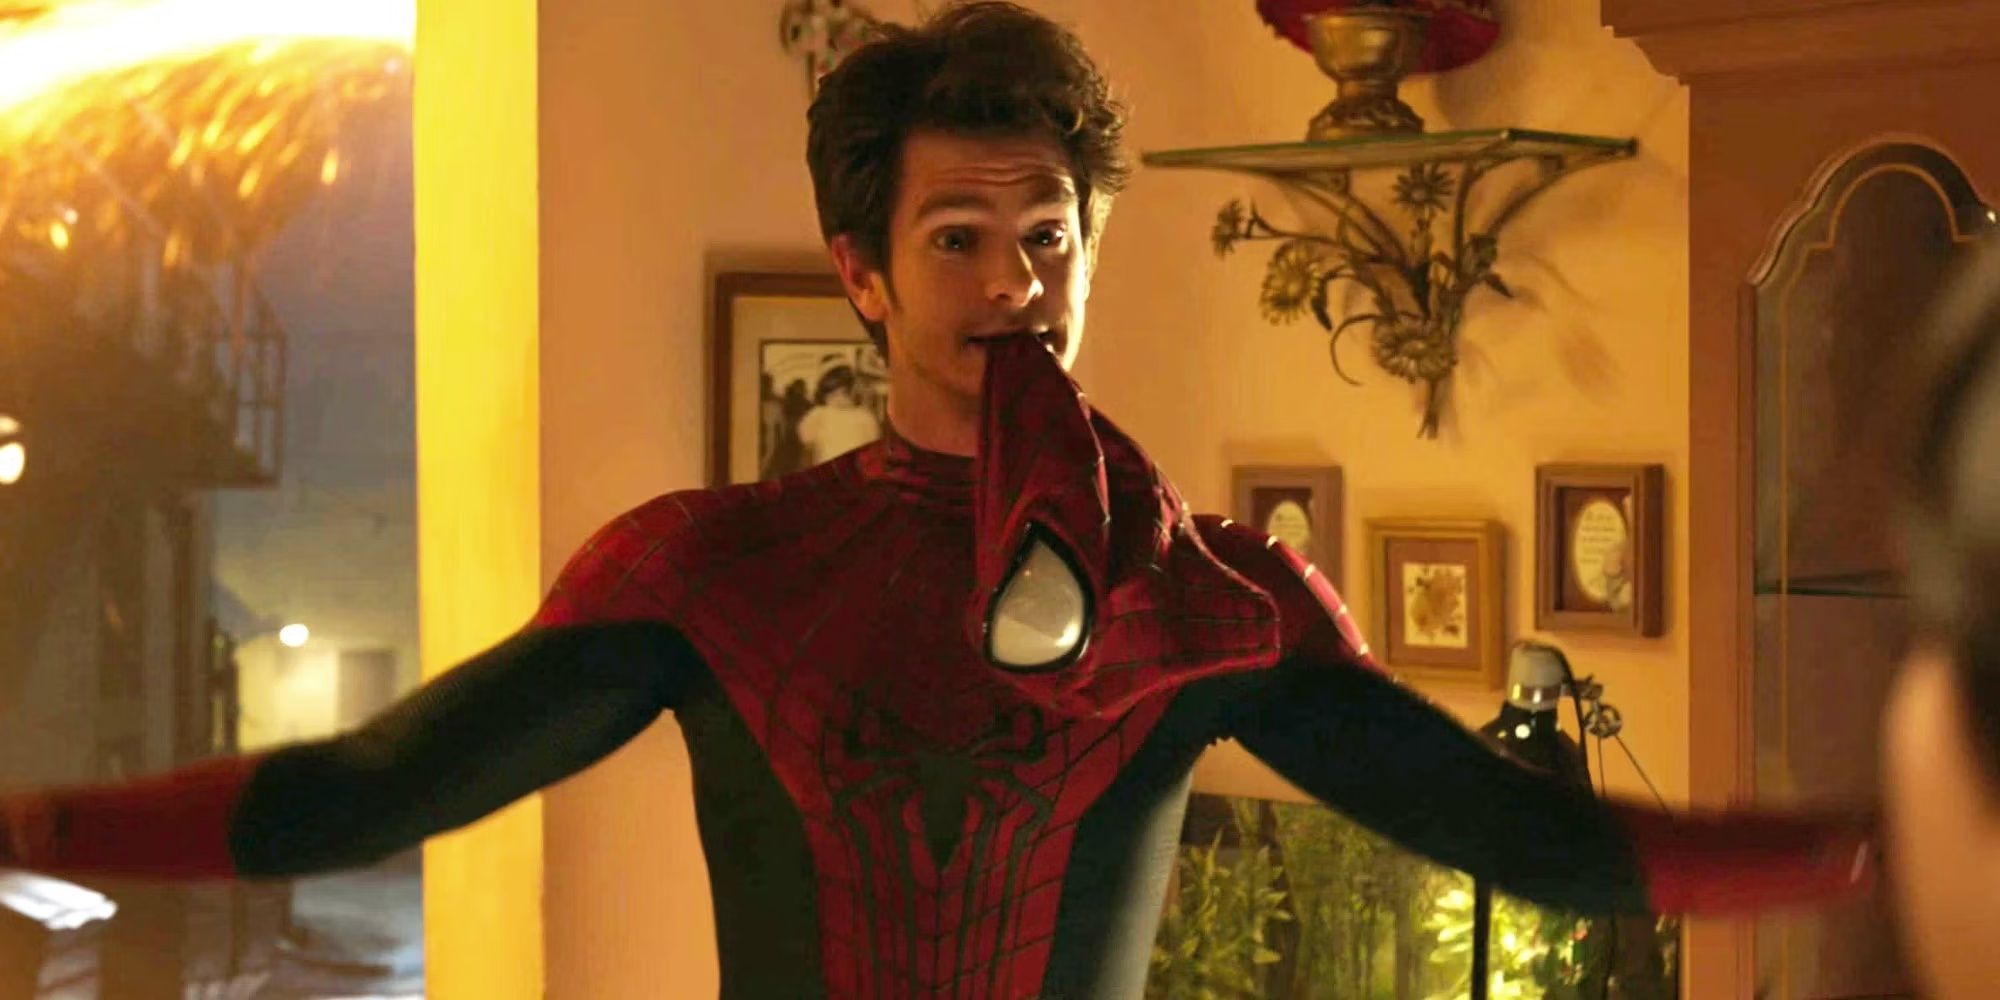 Andrew Garfield in front of a portal in Spider-Man No Way Home